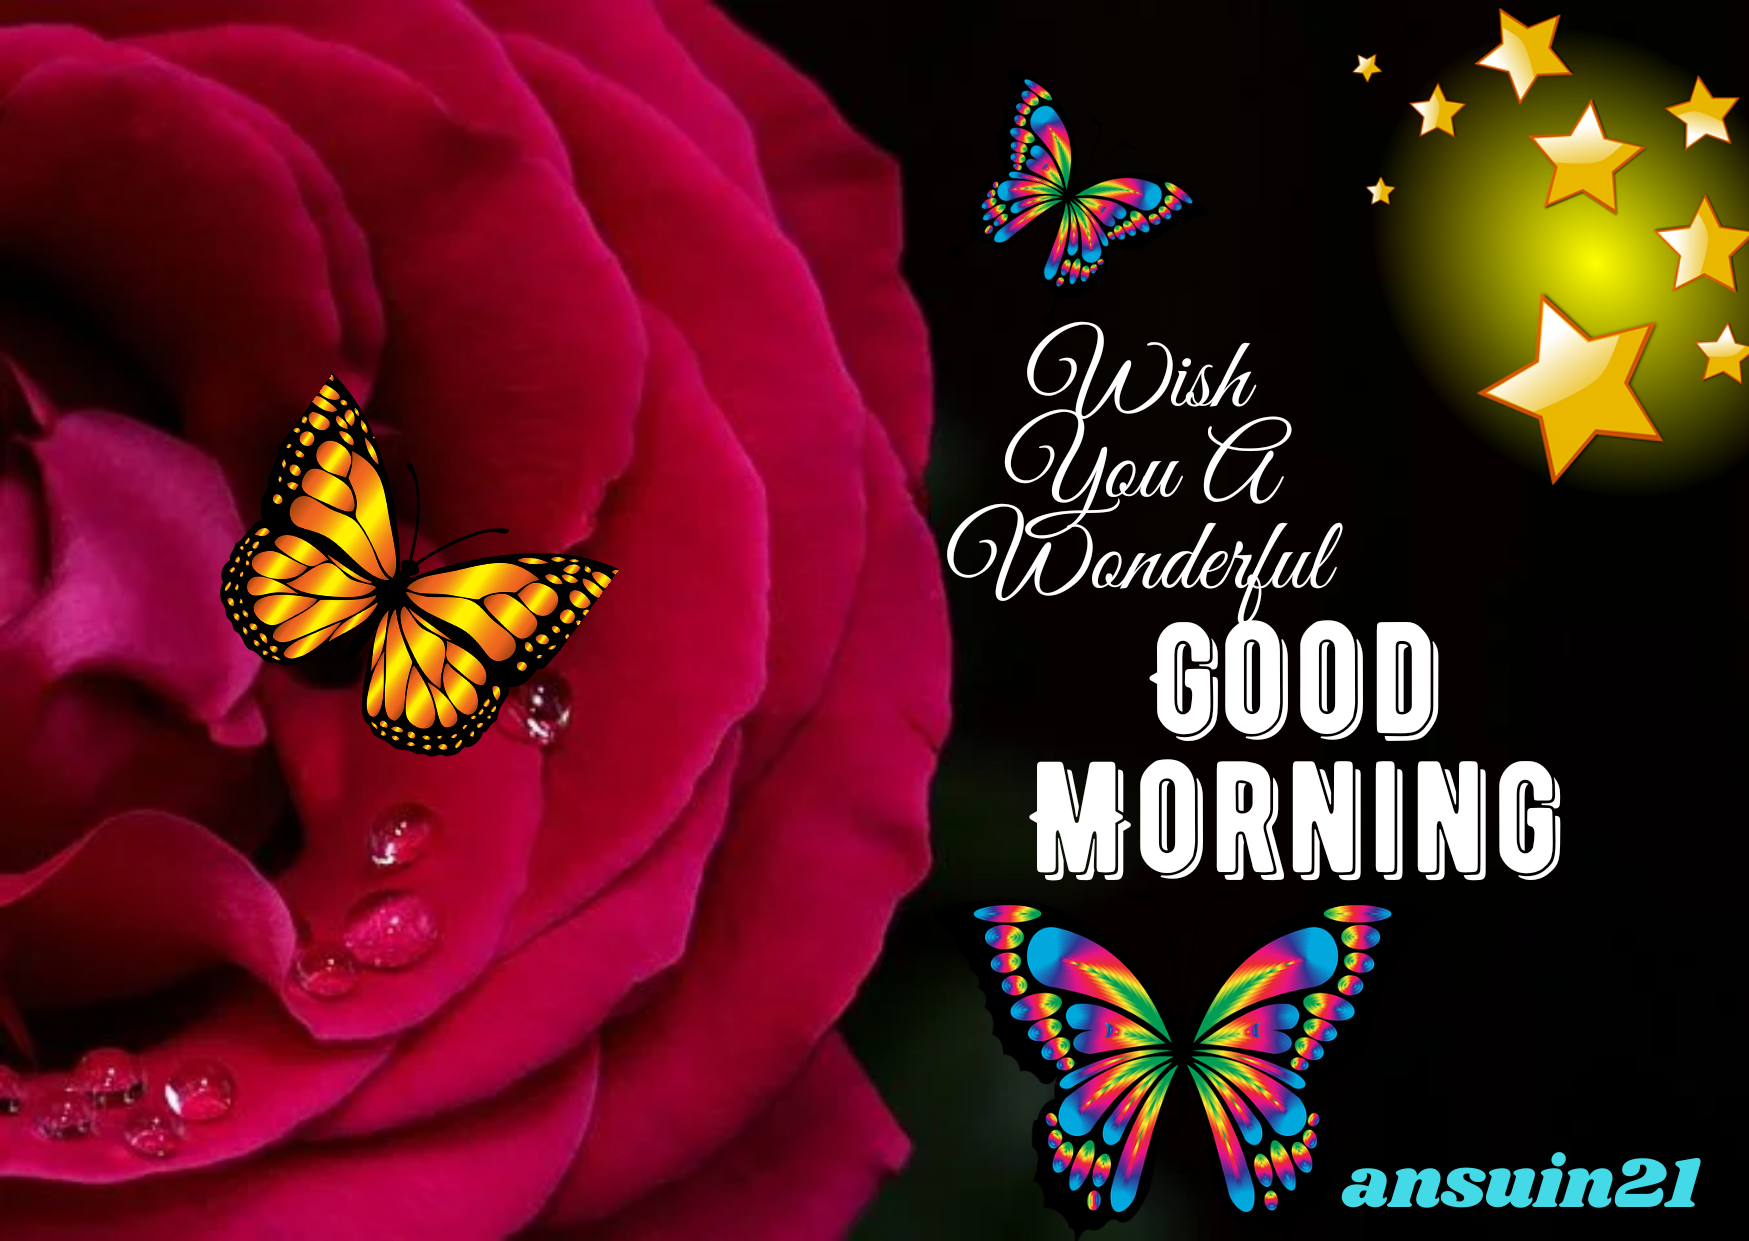 Best Good Morning HD Images for whatsaap free download, Romantic Good Morning English Status, Love Good Morning HD photos,